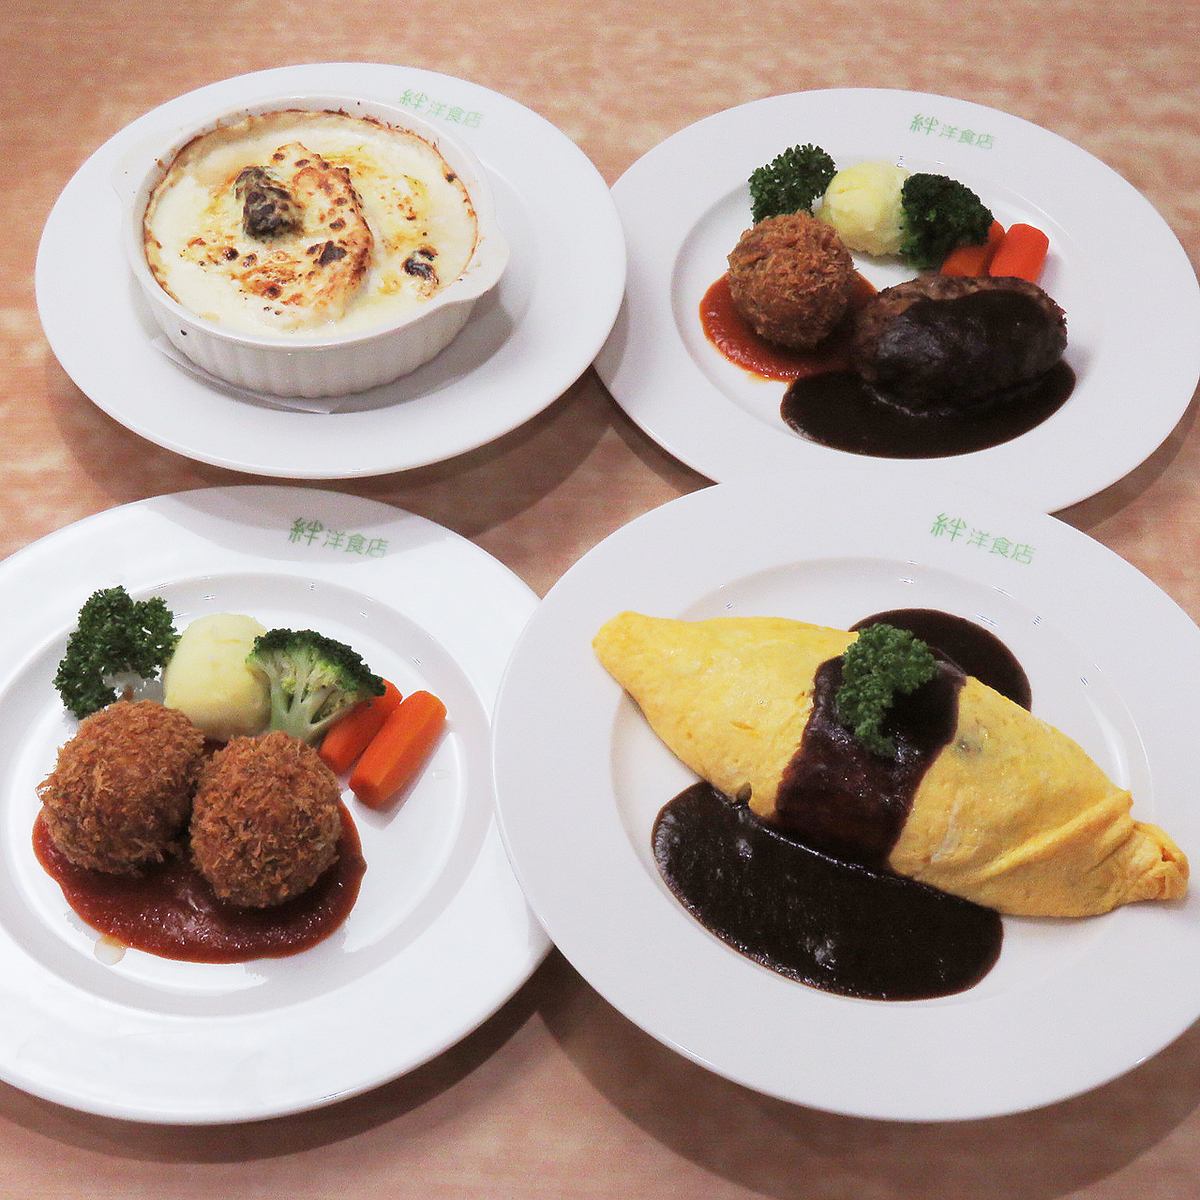 ◆ Lunch is also very popular ◎ You can enjoy authentic Western food at a reasonable price ♪